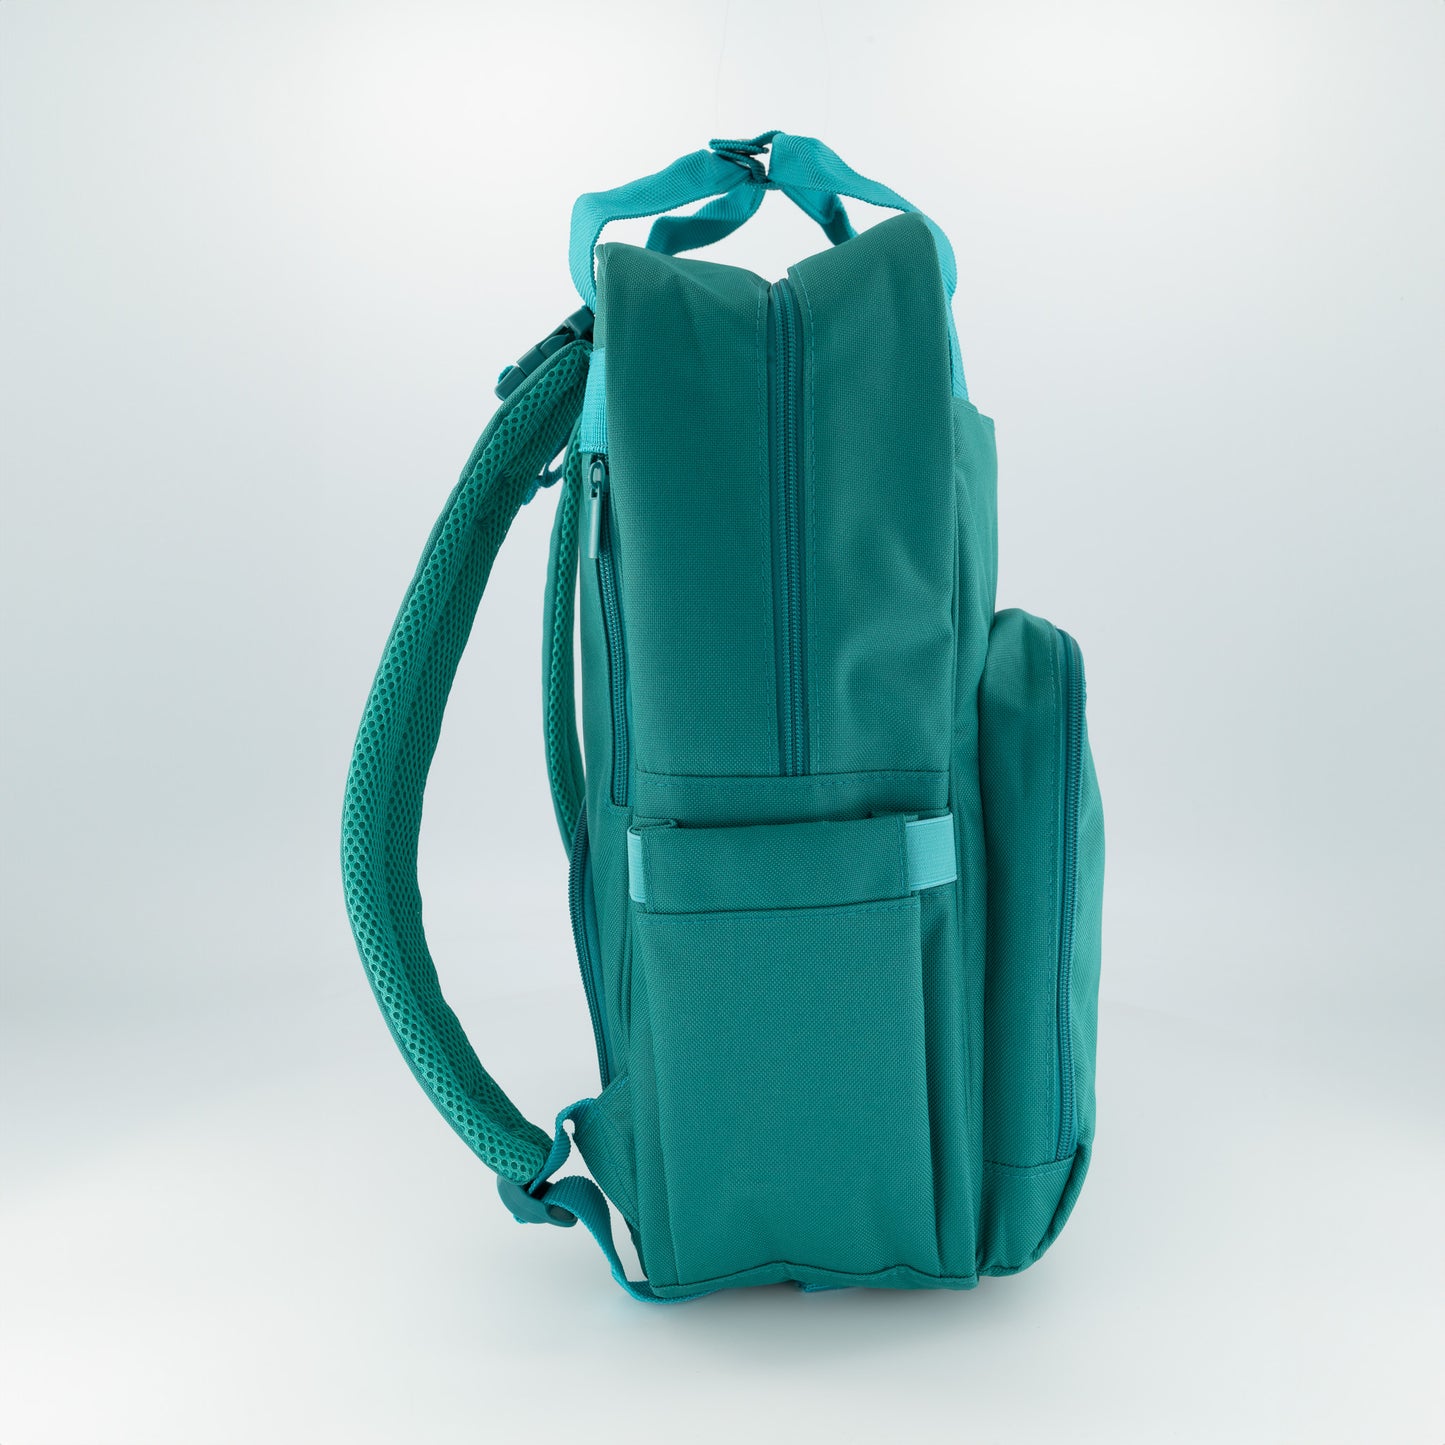 The Camy Nappy Backpack (Teal Green)